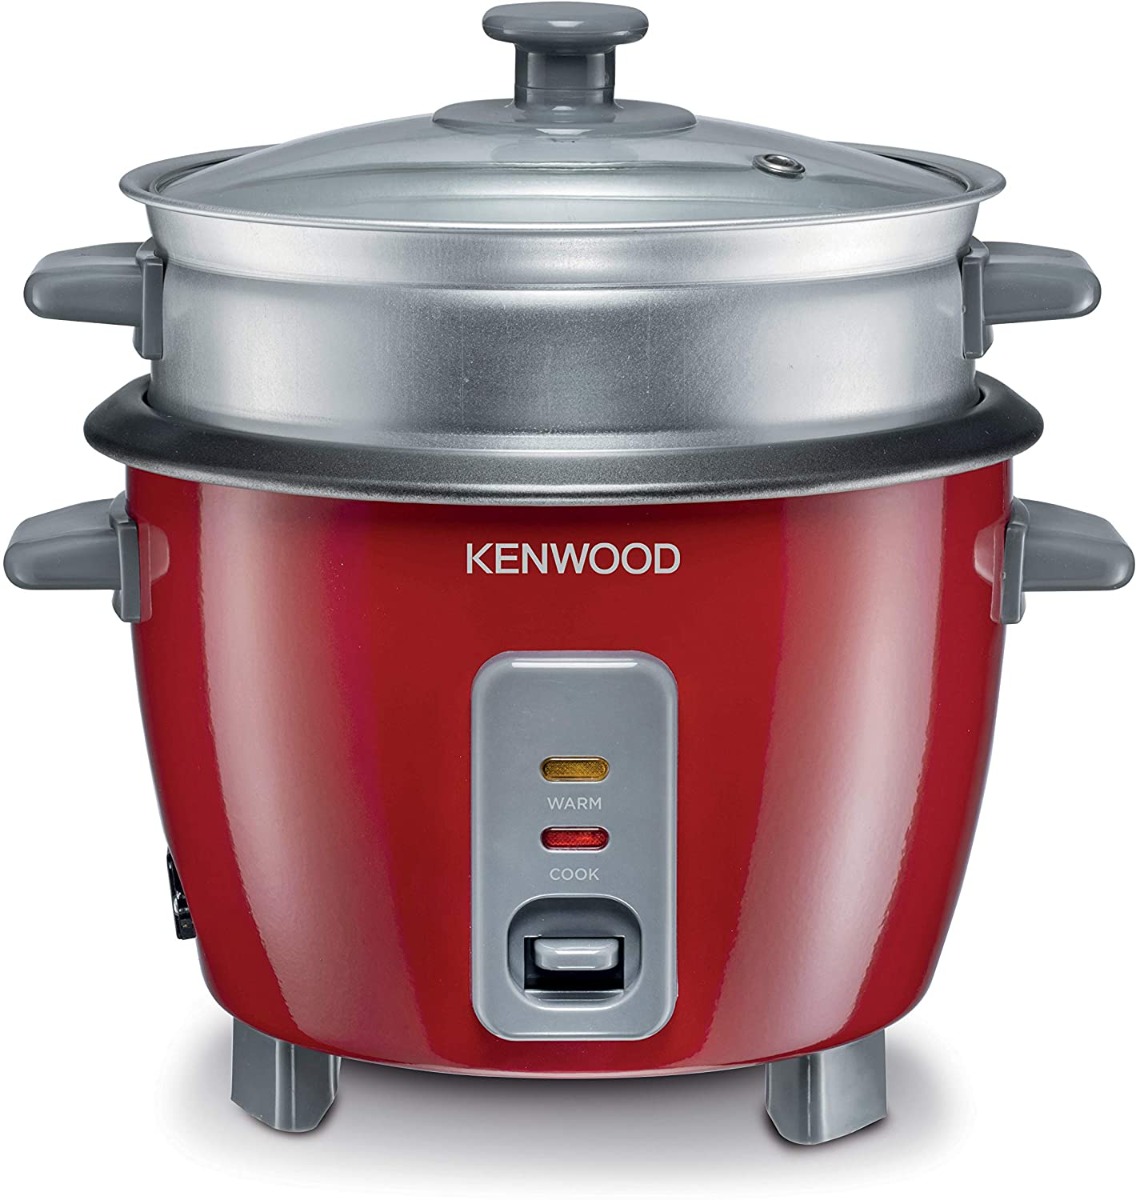 Kenwood 2 in 1 Rice Cooker with Steamer RCM30.000RD, 0.60 LTR